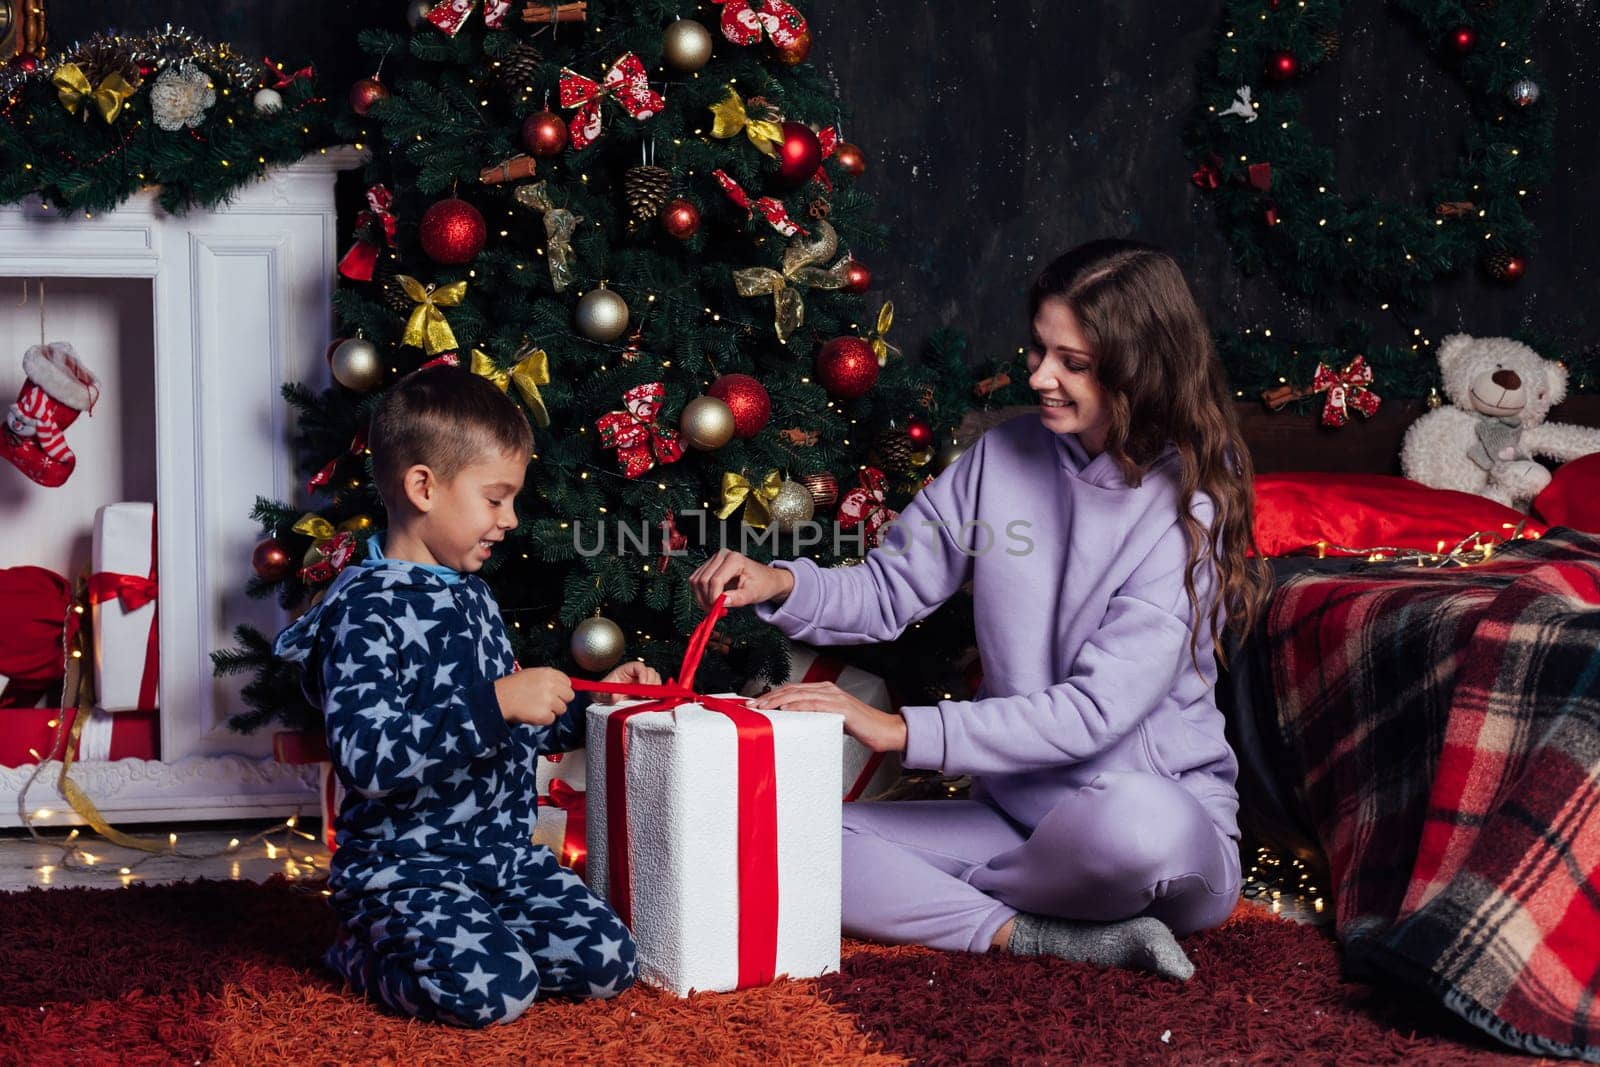 Mom with son at christmas tree with gifts new garland winter by Simakov